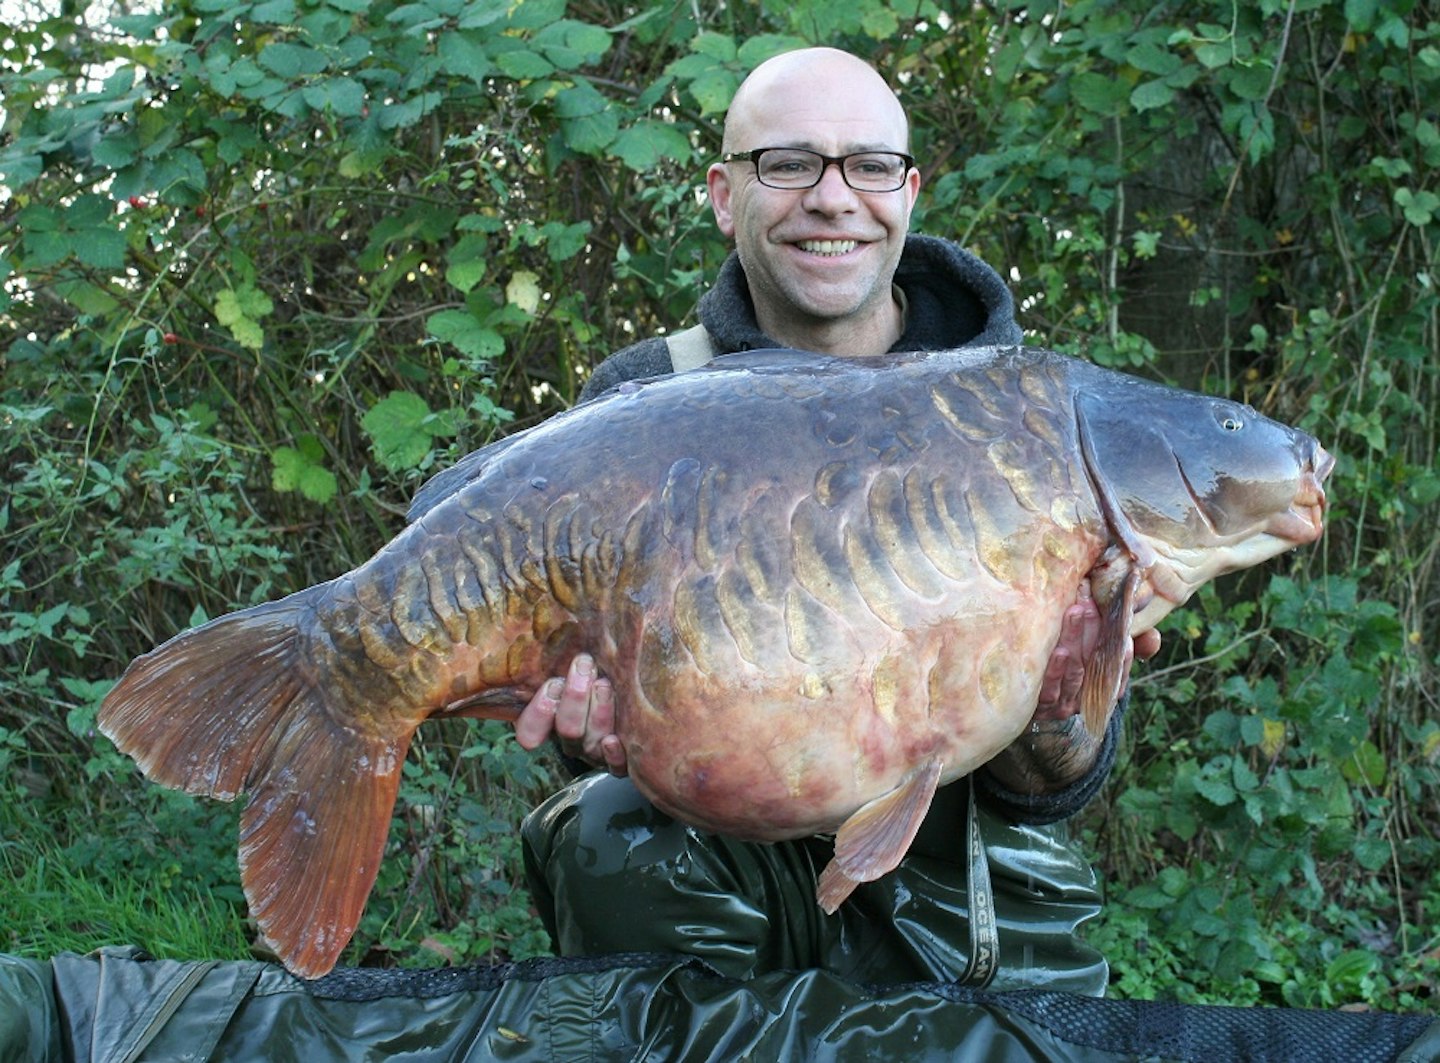 The Small Plated at 47lb